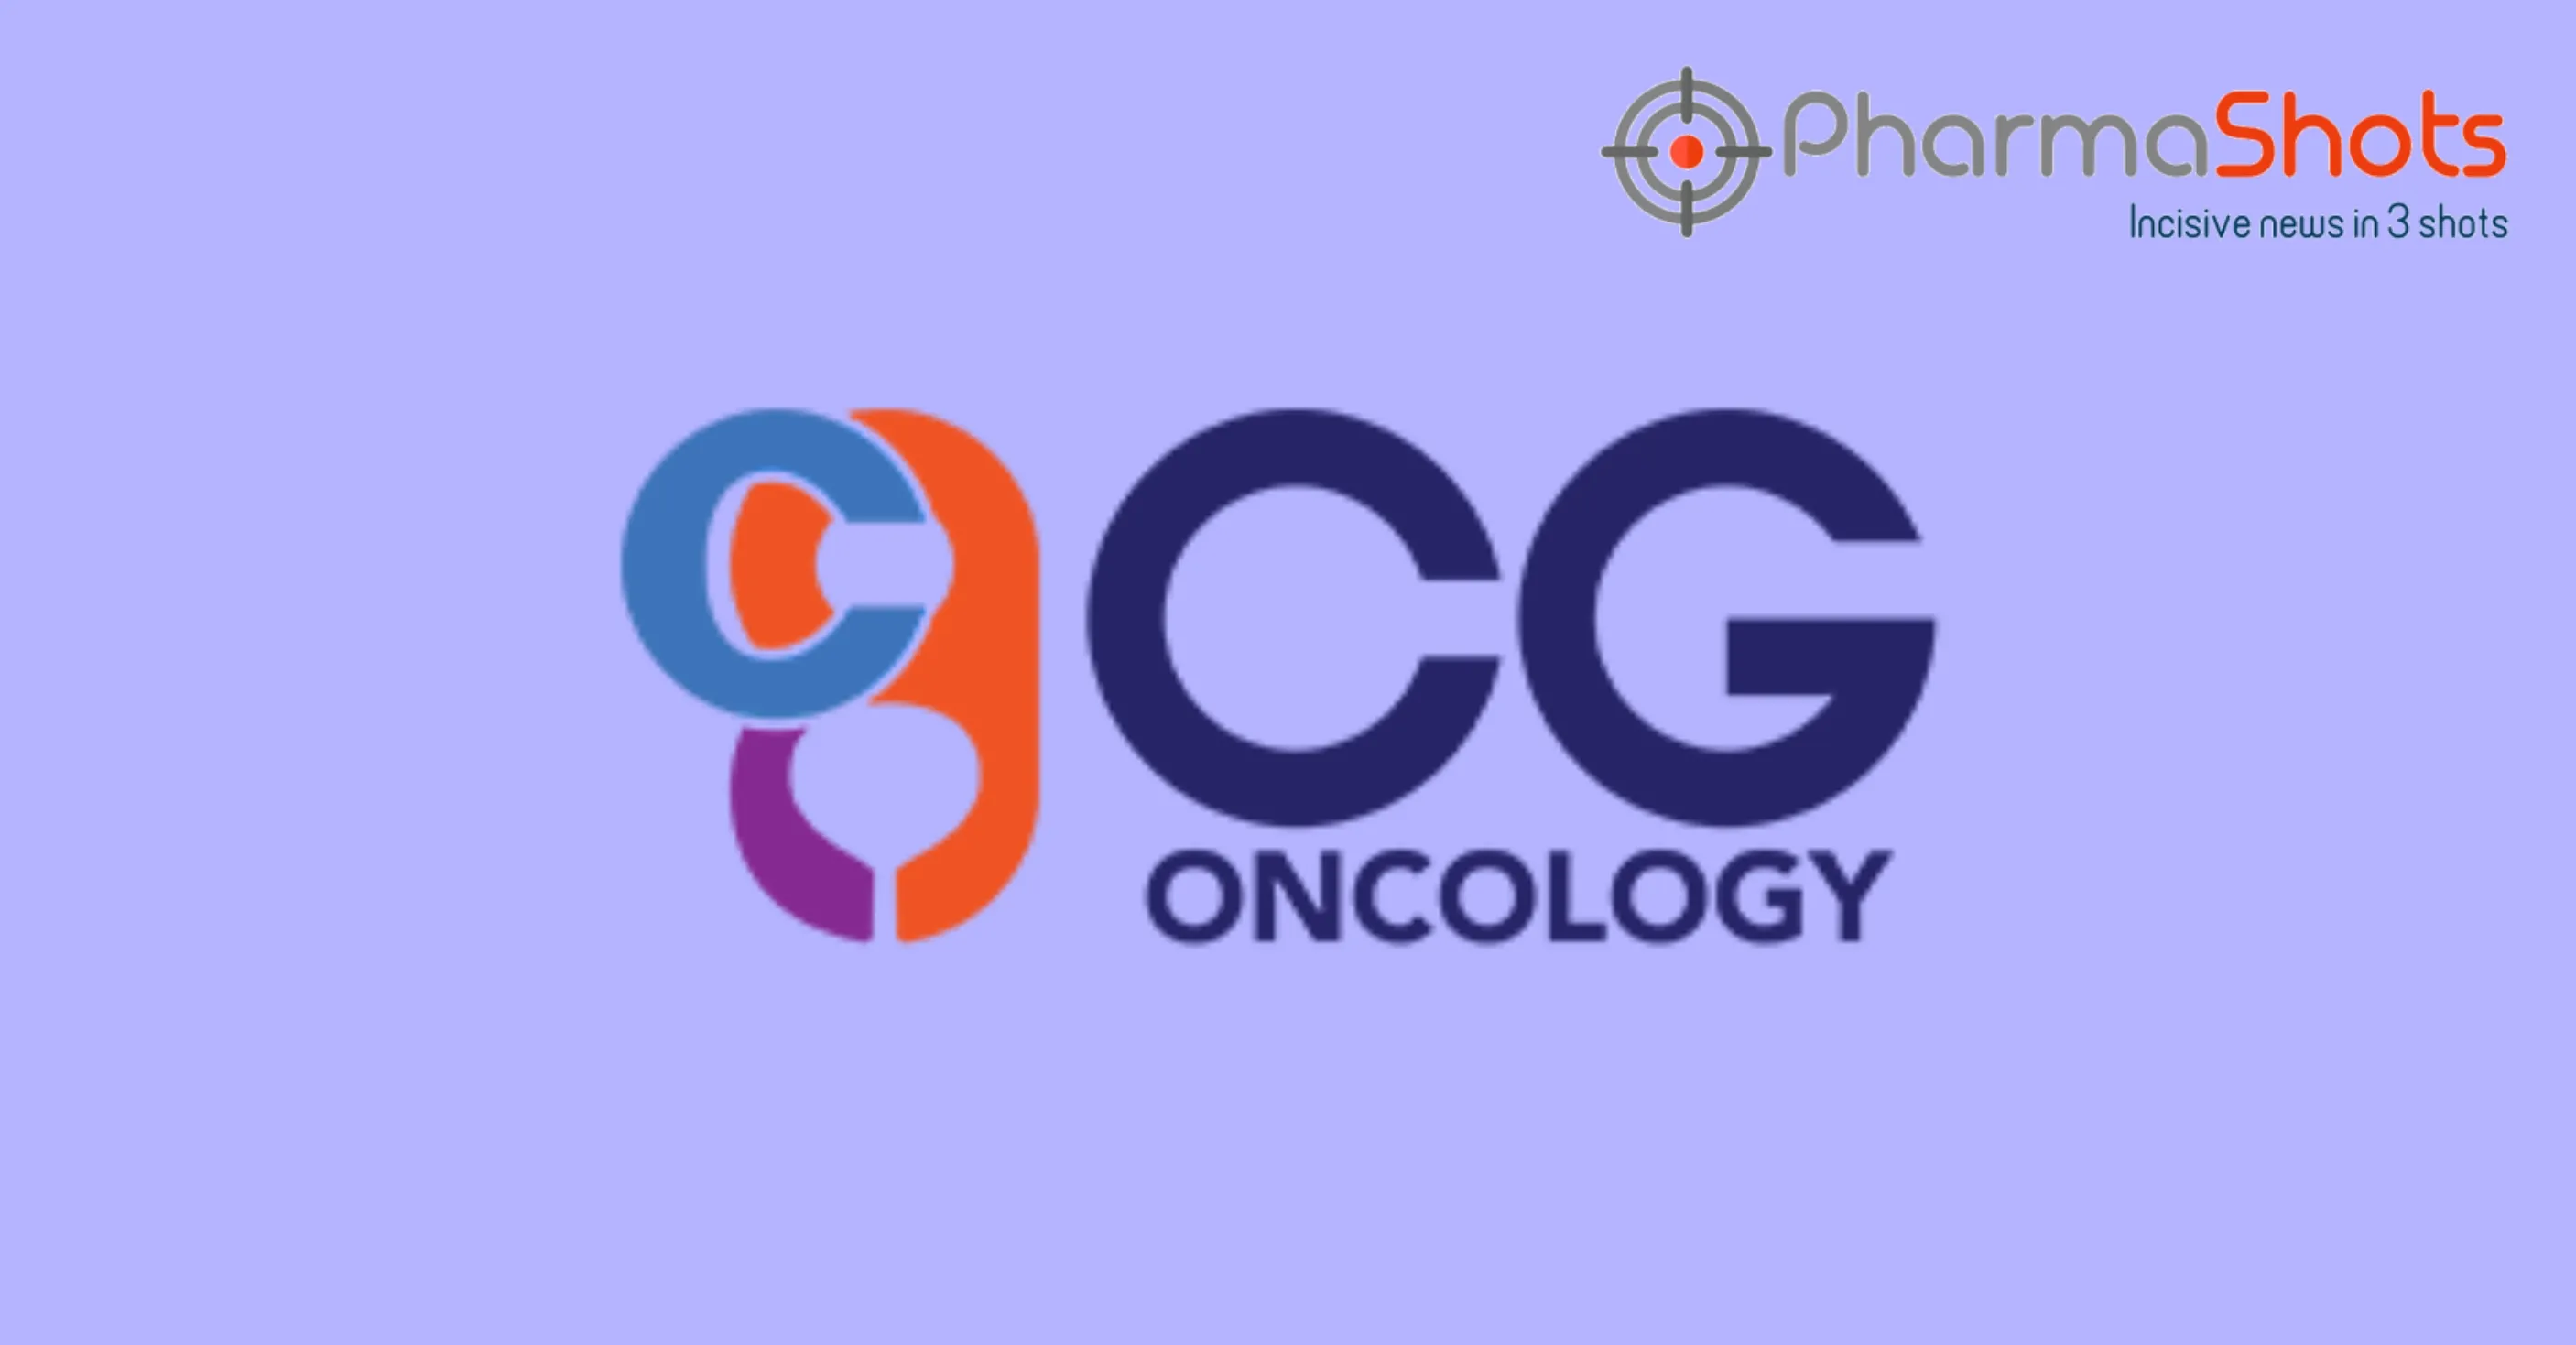 CG Oncology’s Cretostimogene Grenadenorepvec Receives FTD and BTD from the US FDA for High-Risk BCG-Unresponsive Non-Muscle Invasive Bladder Cancer